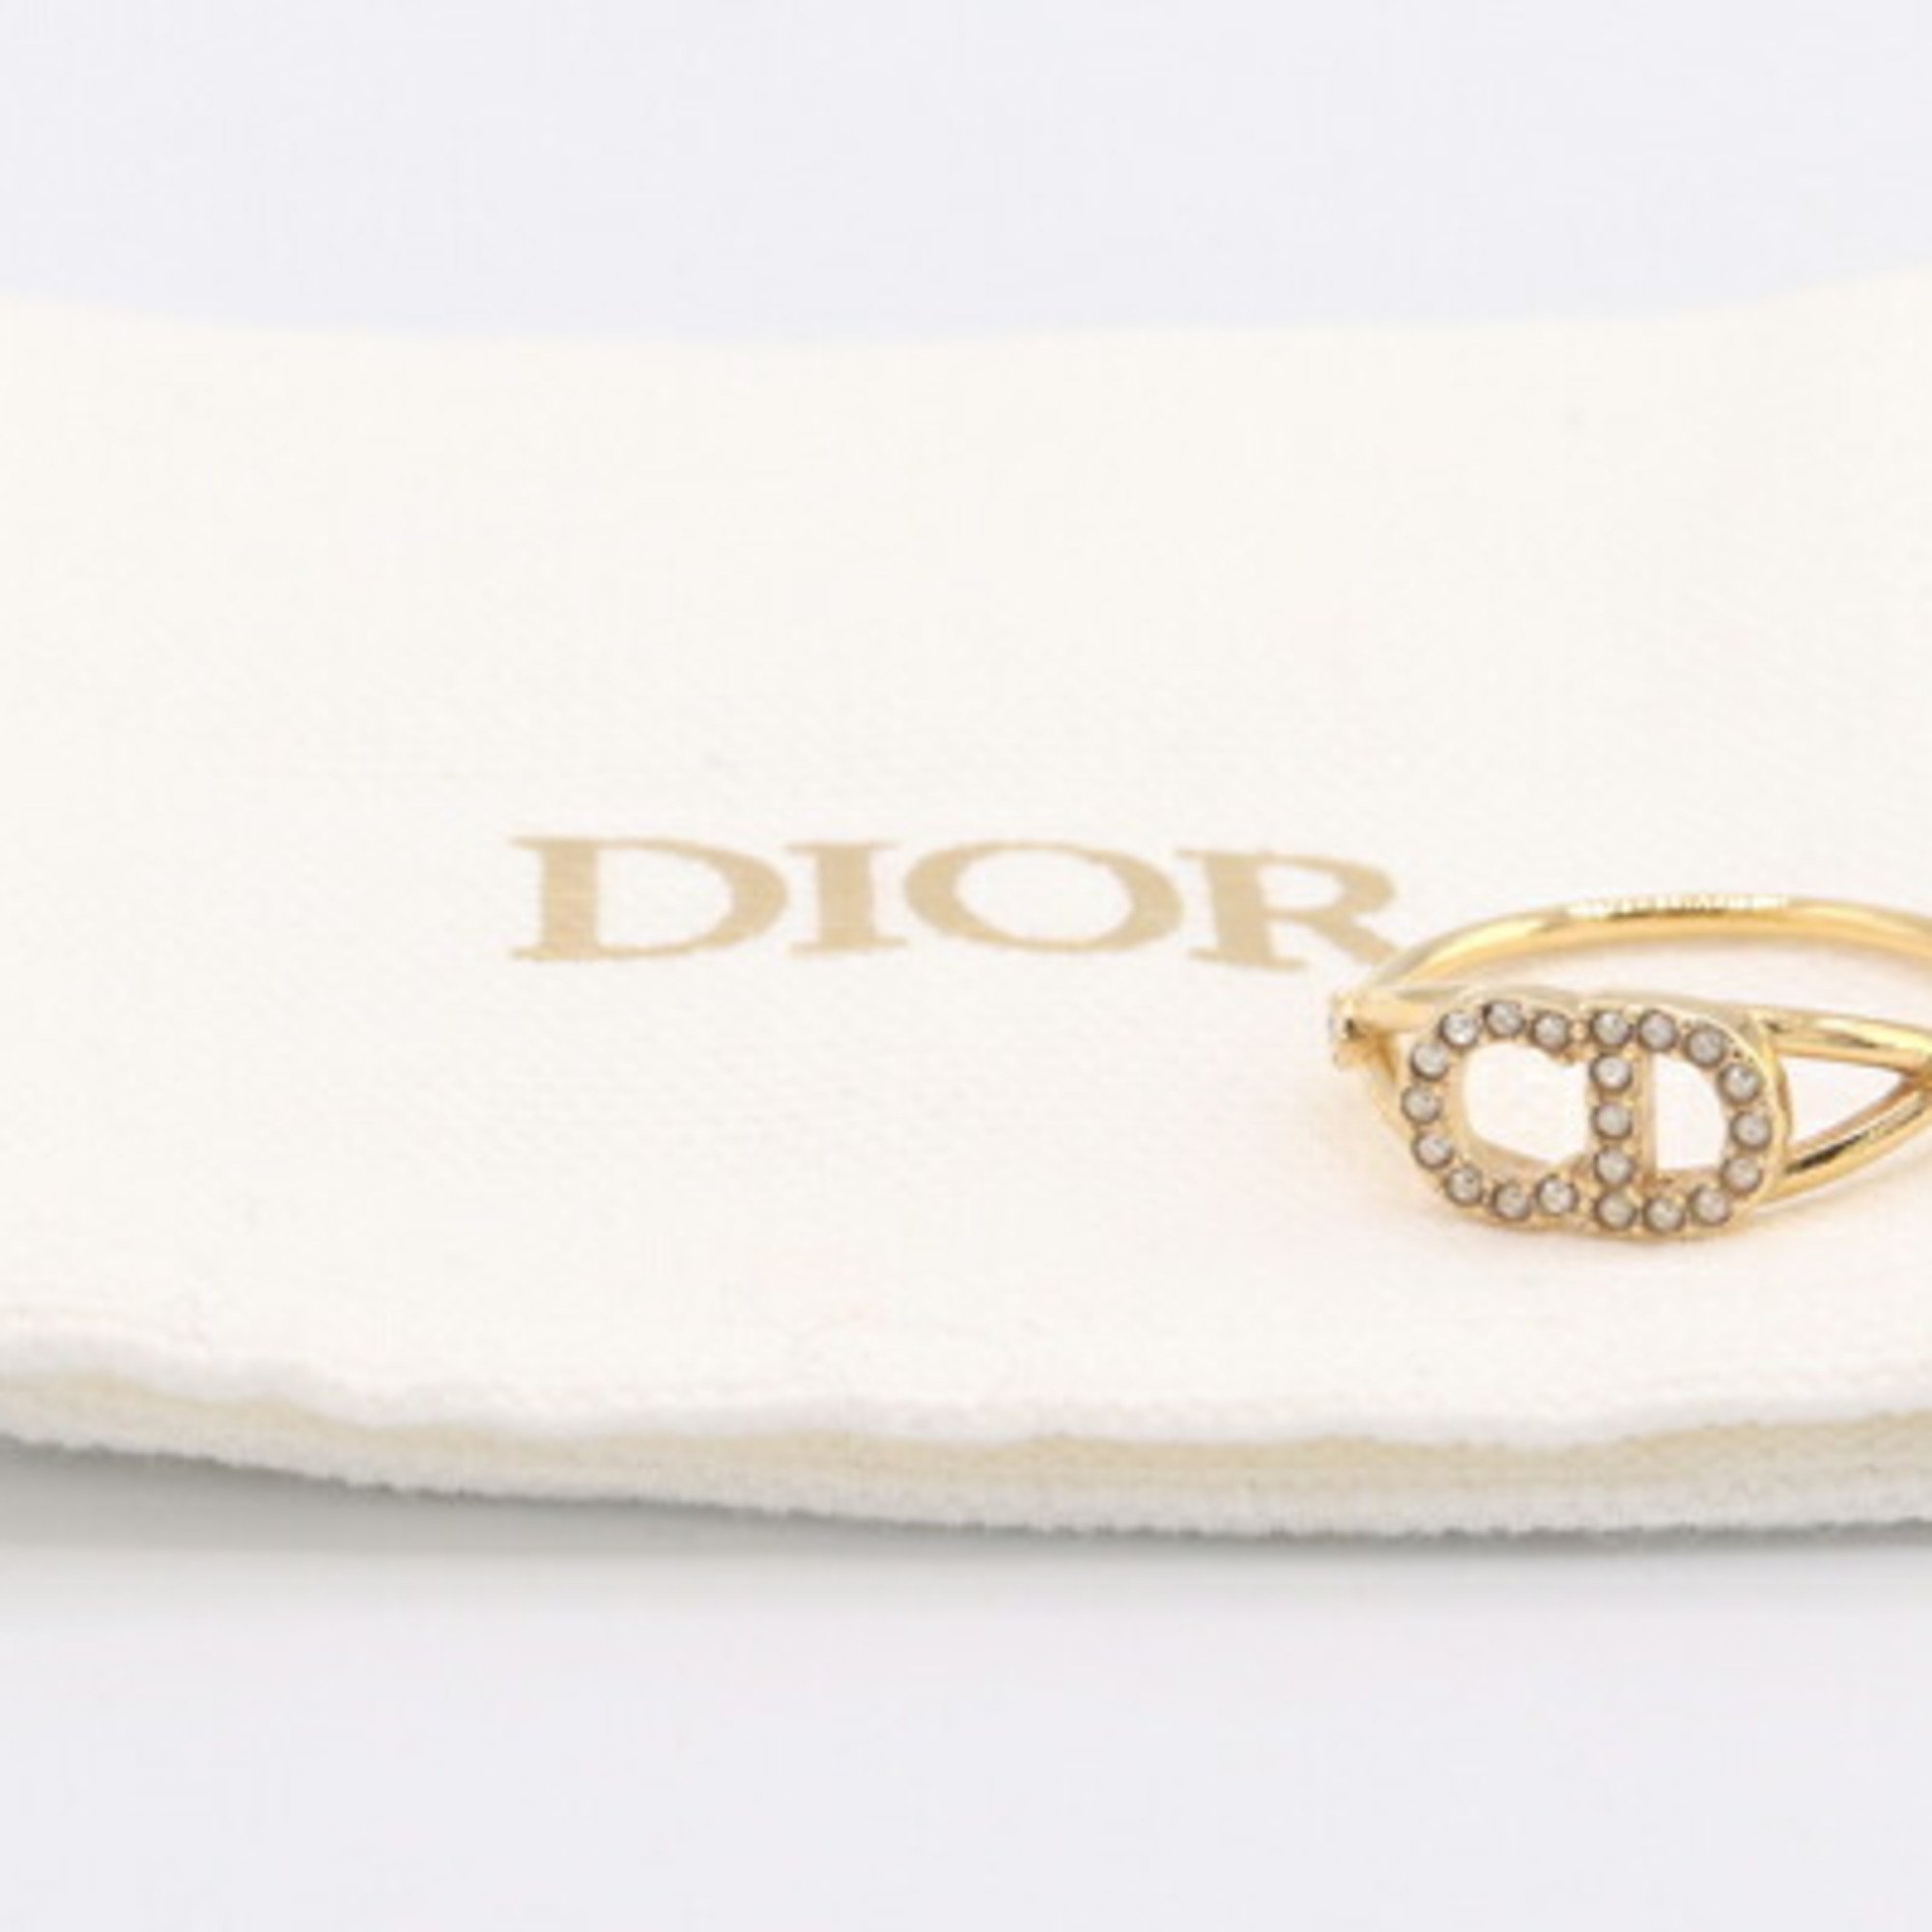 Christian Dior Dior Ring Claire D Lune R1137CDLCY Gold Metal Crystal No. 13.5 CD Ladies DIOR